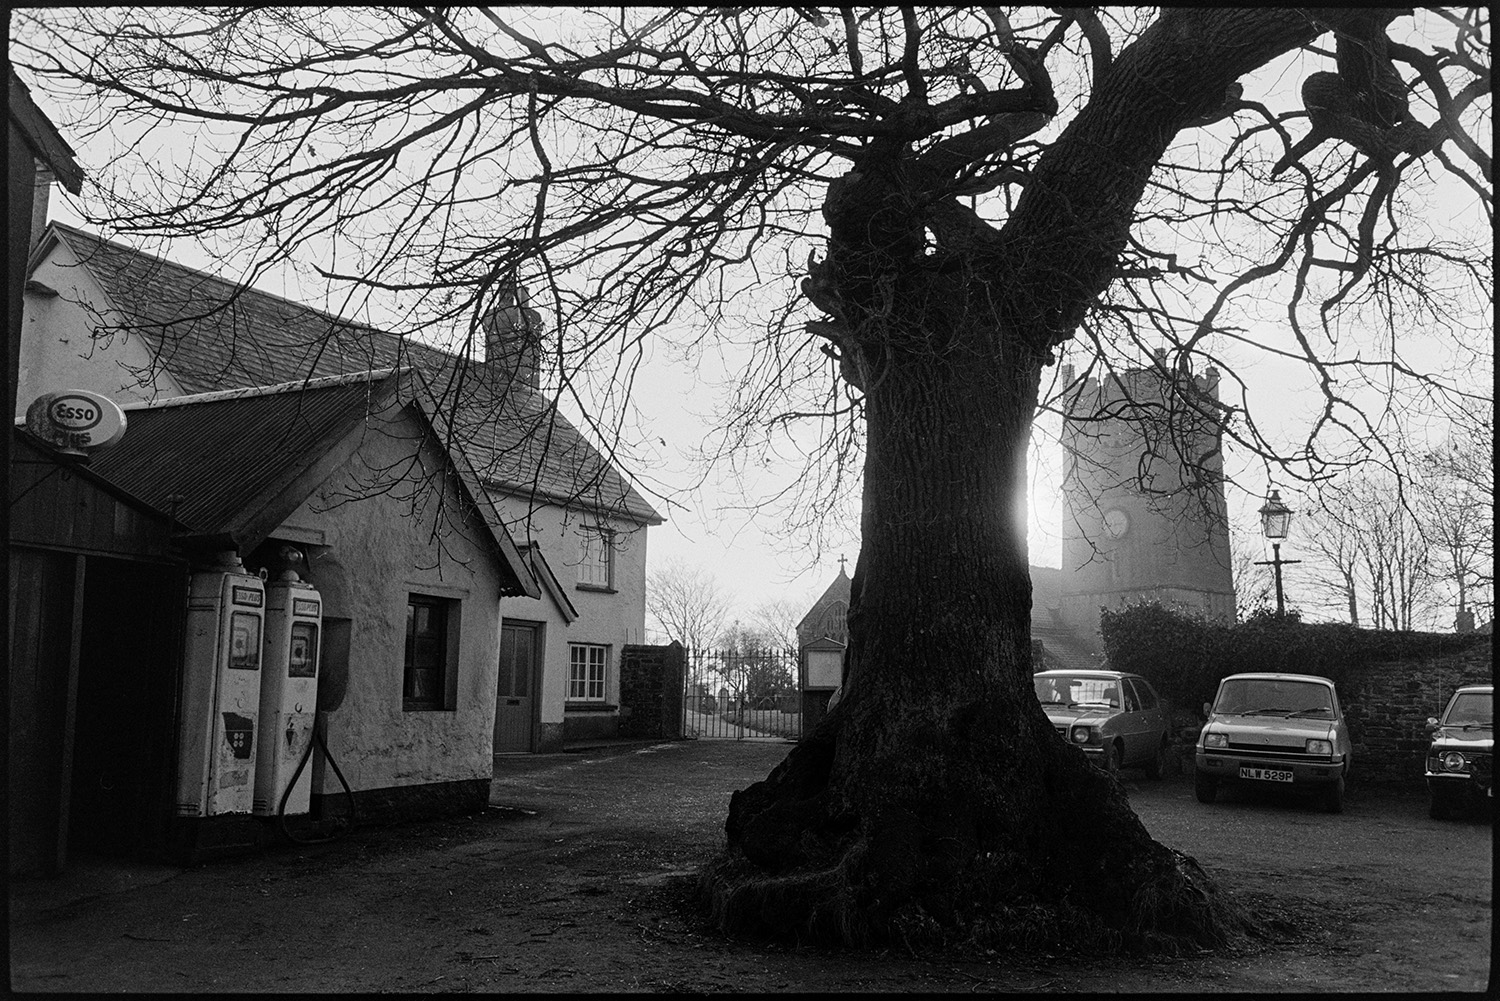 Oak tree in the middle of village. 
[The Burrington Oak in the middle of Burrington village. Petrol pumps and parked cars are by the oak tree and Burrington Church tower can be seen in the background.]